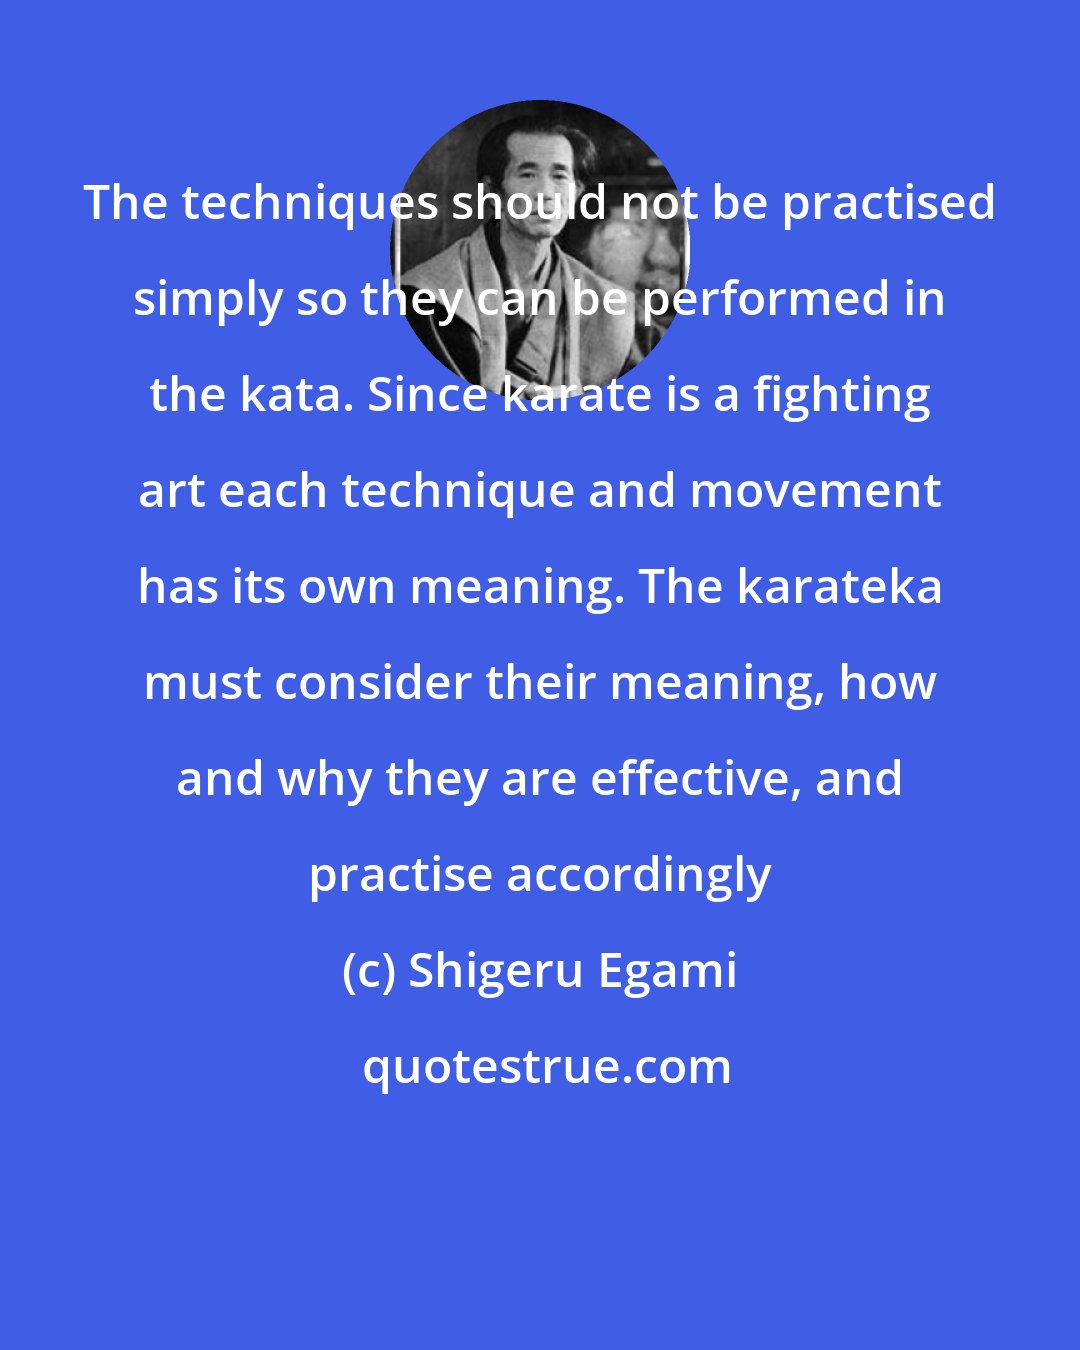 Shigeru Egami: The techniques should not be practised simply so they can be performed in the kata. Since karate is a fighting art each technique and movement has its own meaning. The karateka must consider their meaning, how and why they are effective, and practise accordingly